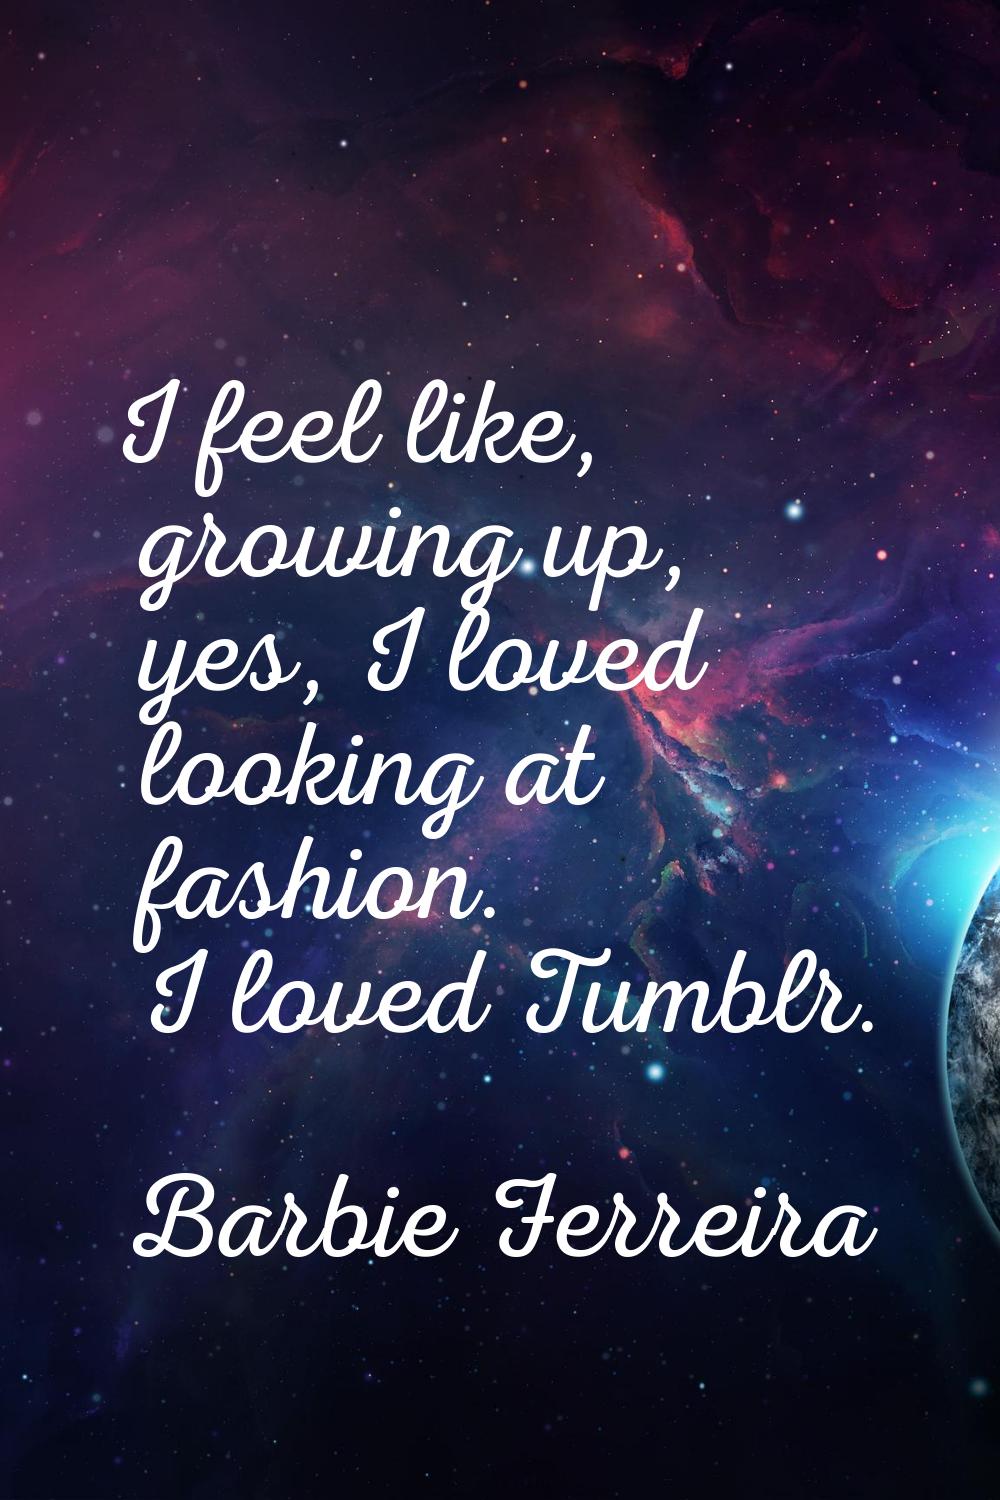 I feel like, growing up, yes, I loved looking at fashion. I loved Tumblr.